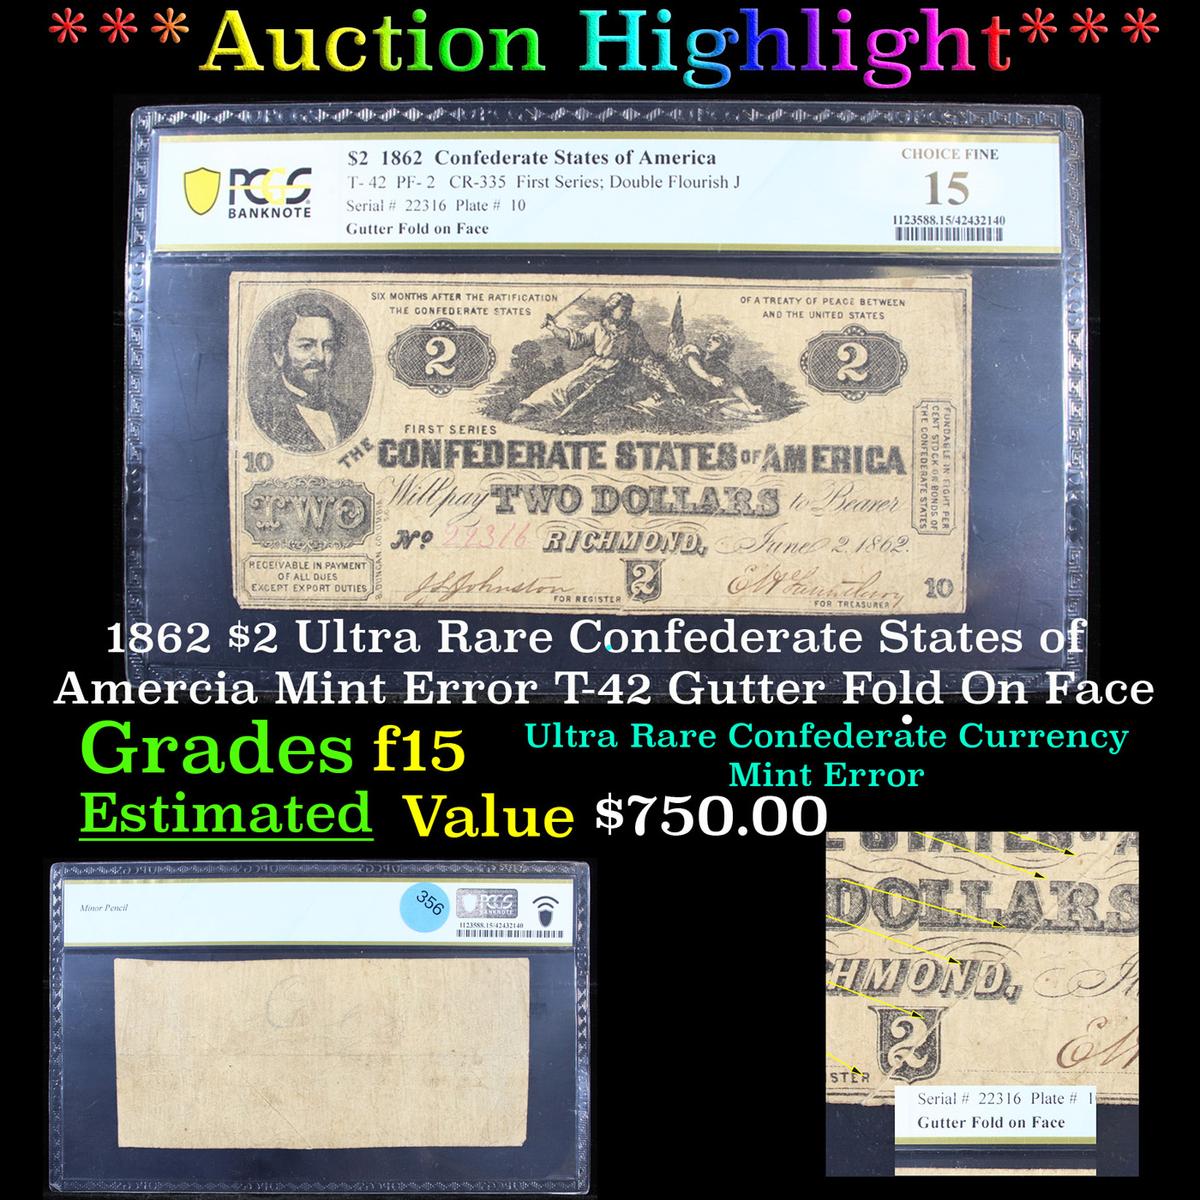 ***Auction Highlight*** PCGS 1862 $2 Ultra Rare Confederate States of Amceria Mint Error T-42 Gutter